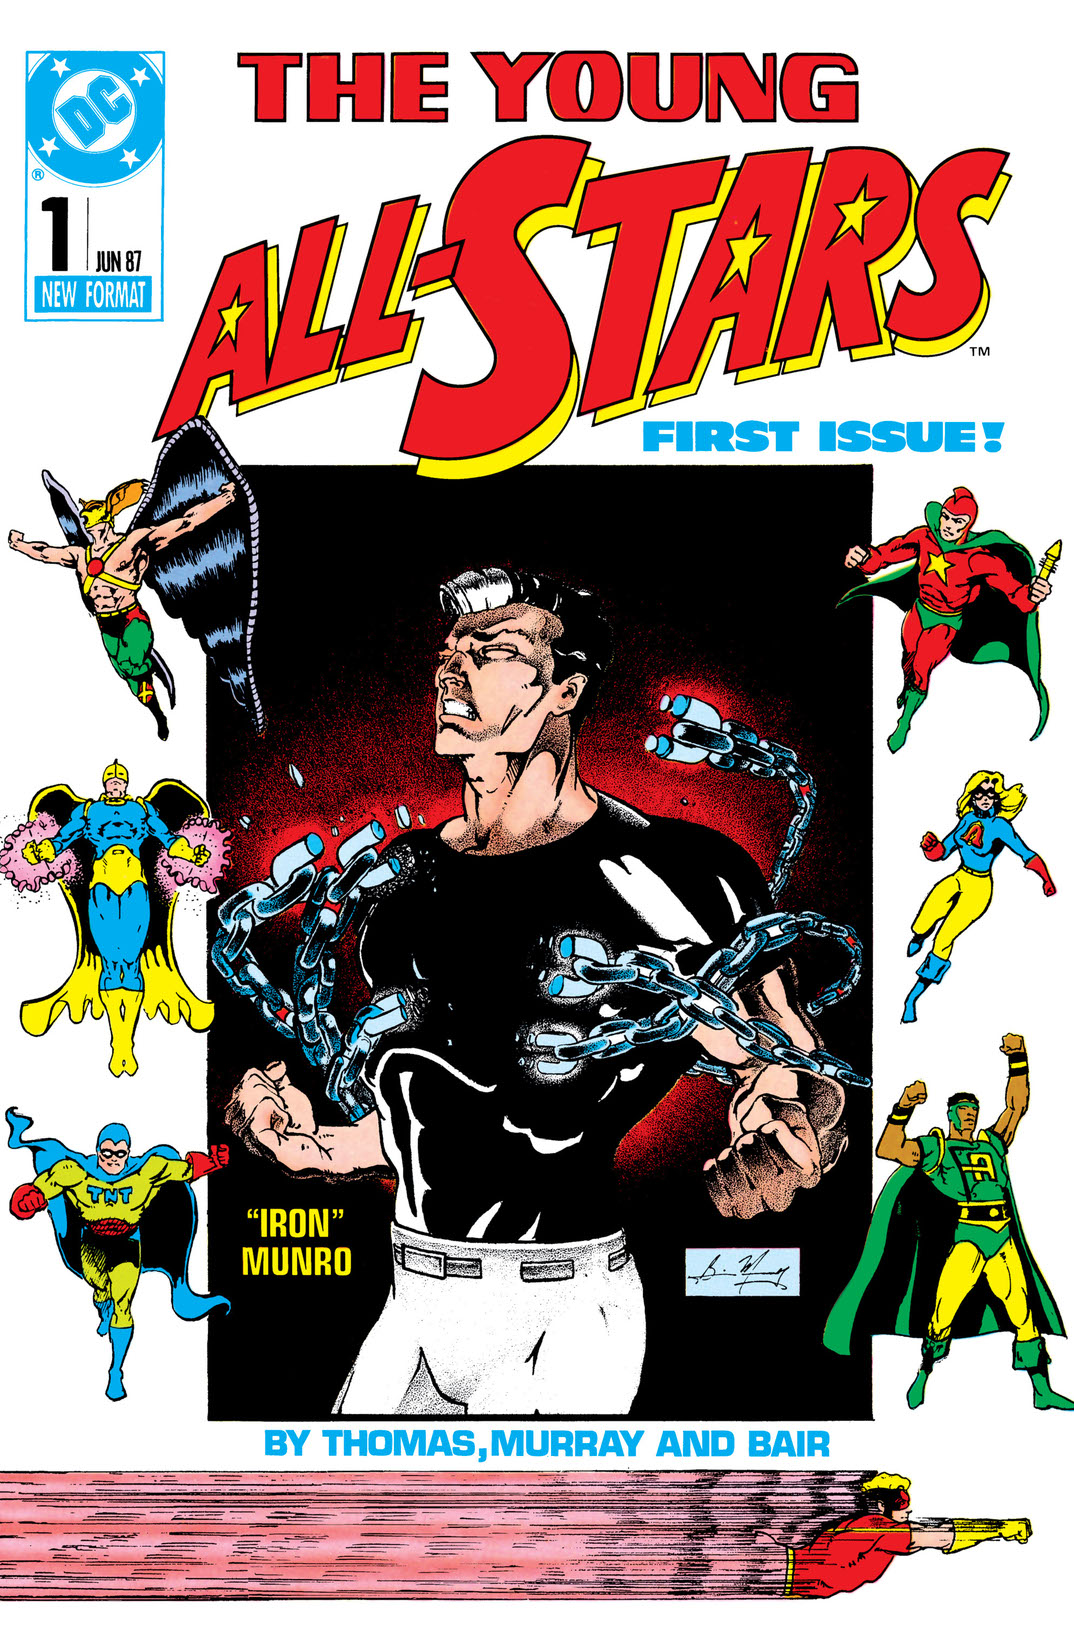 Young All-Stars #1 preview images